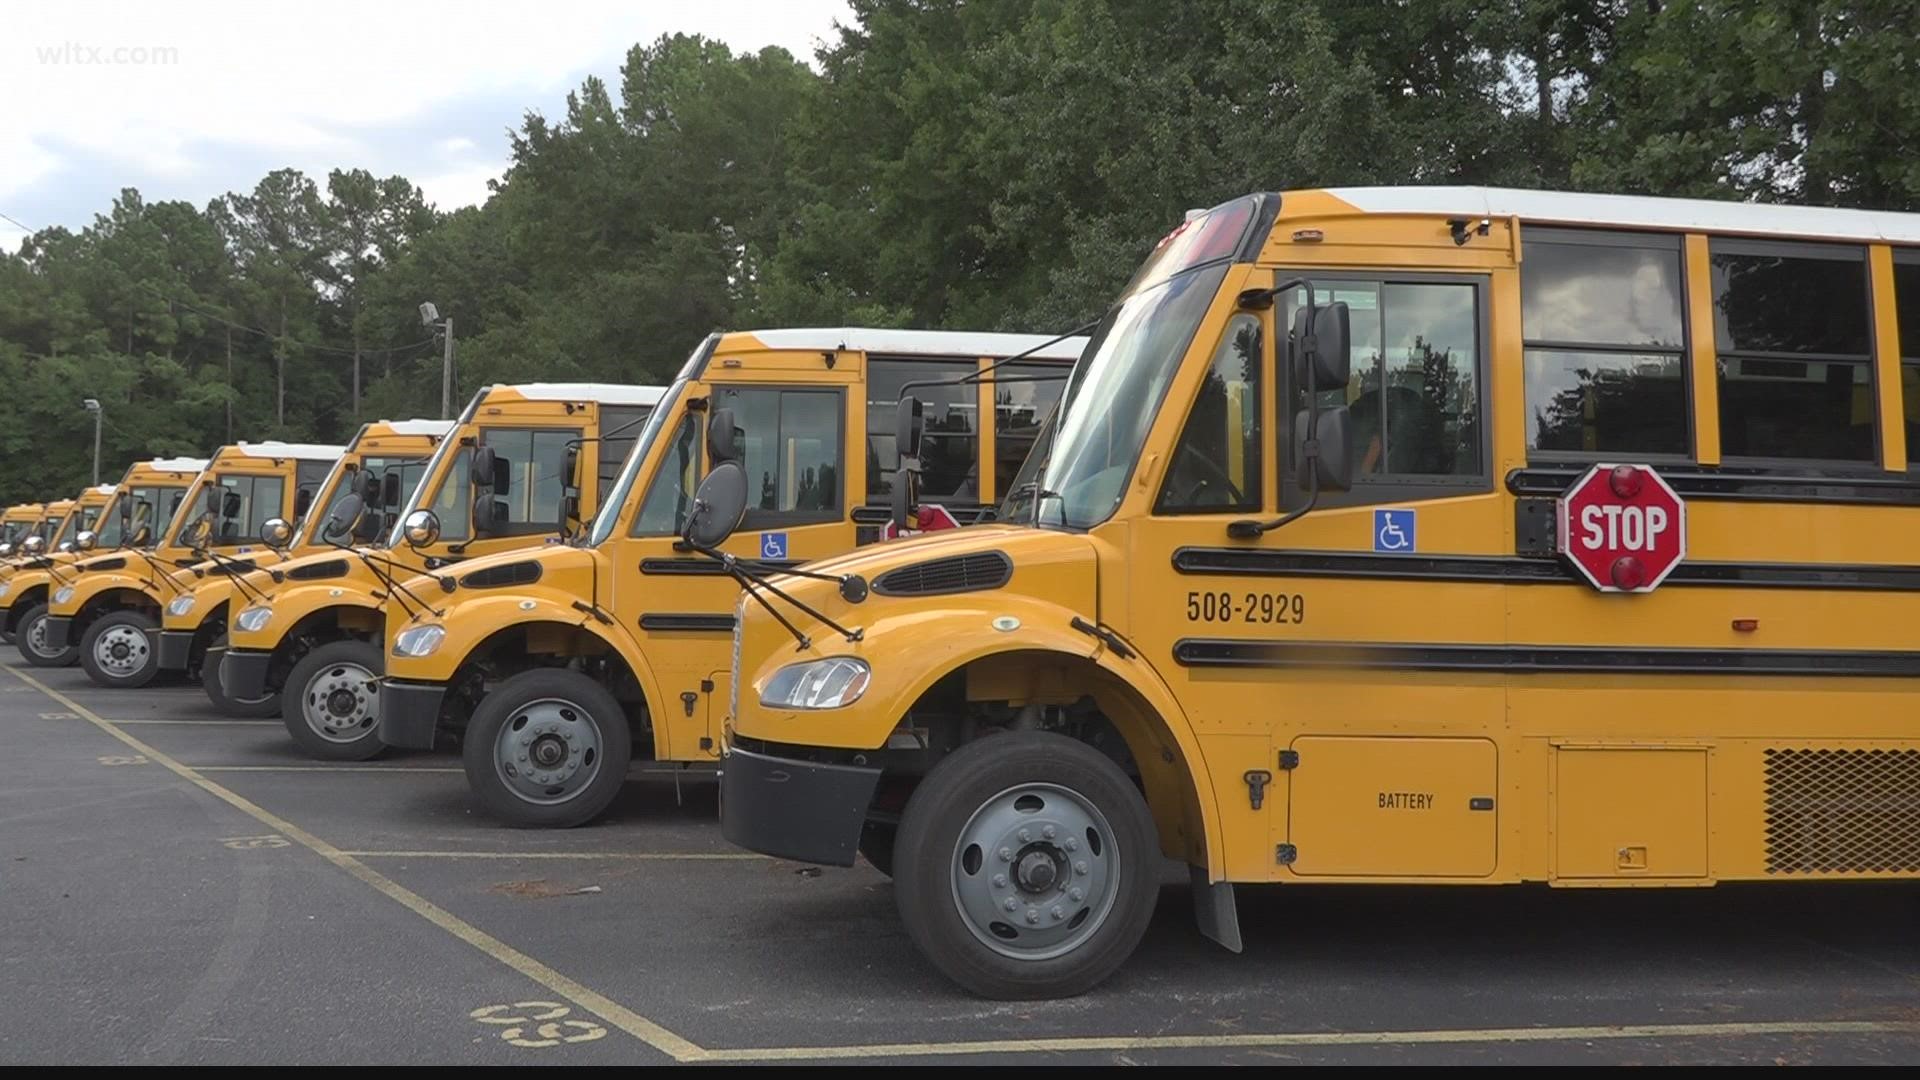 Schools throughout the Midlands are scrambling to fill bus vacancies amid the pandemic.